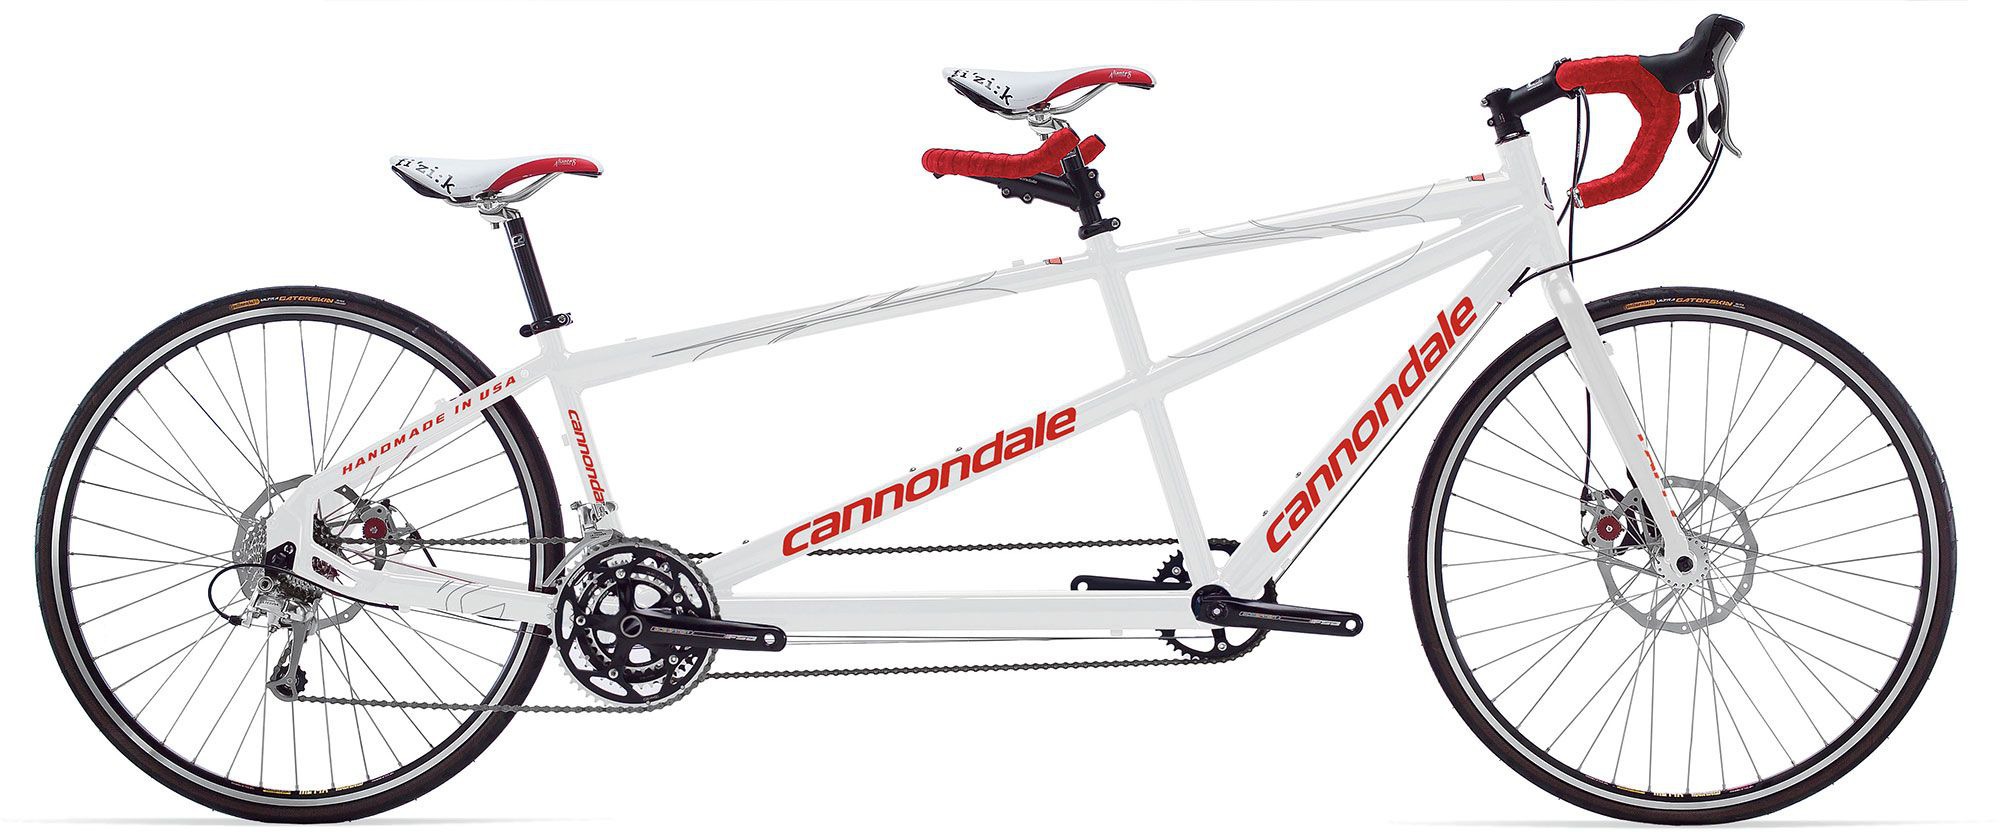 cannondale tandem bicycle for sale